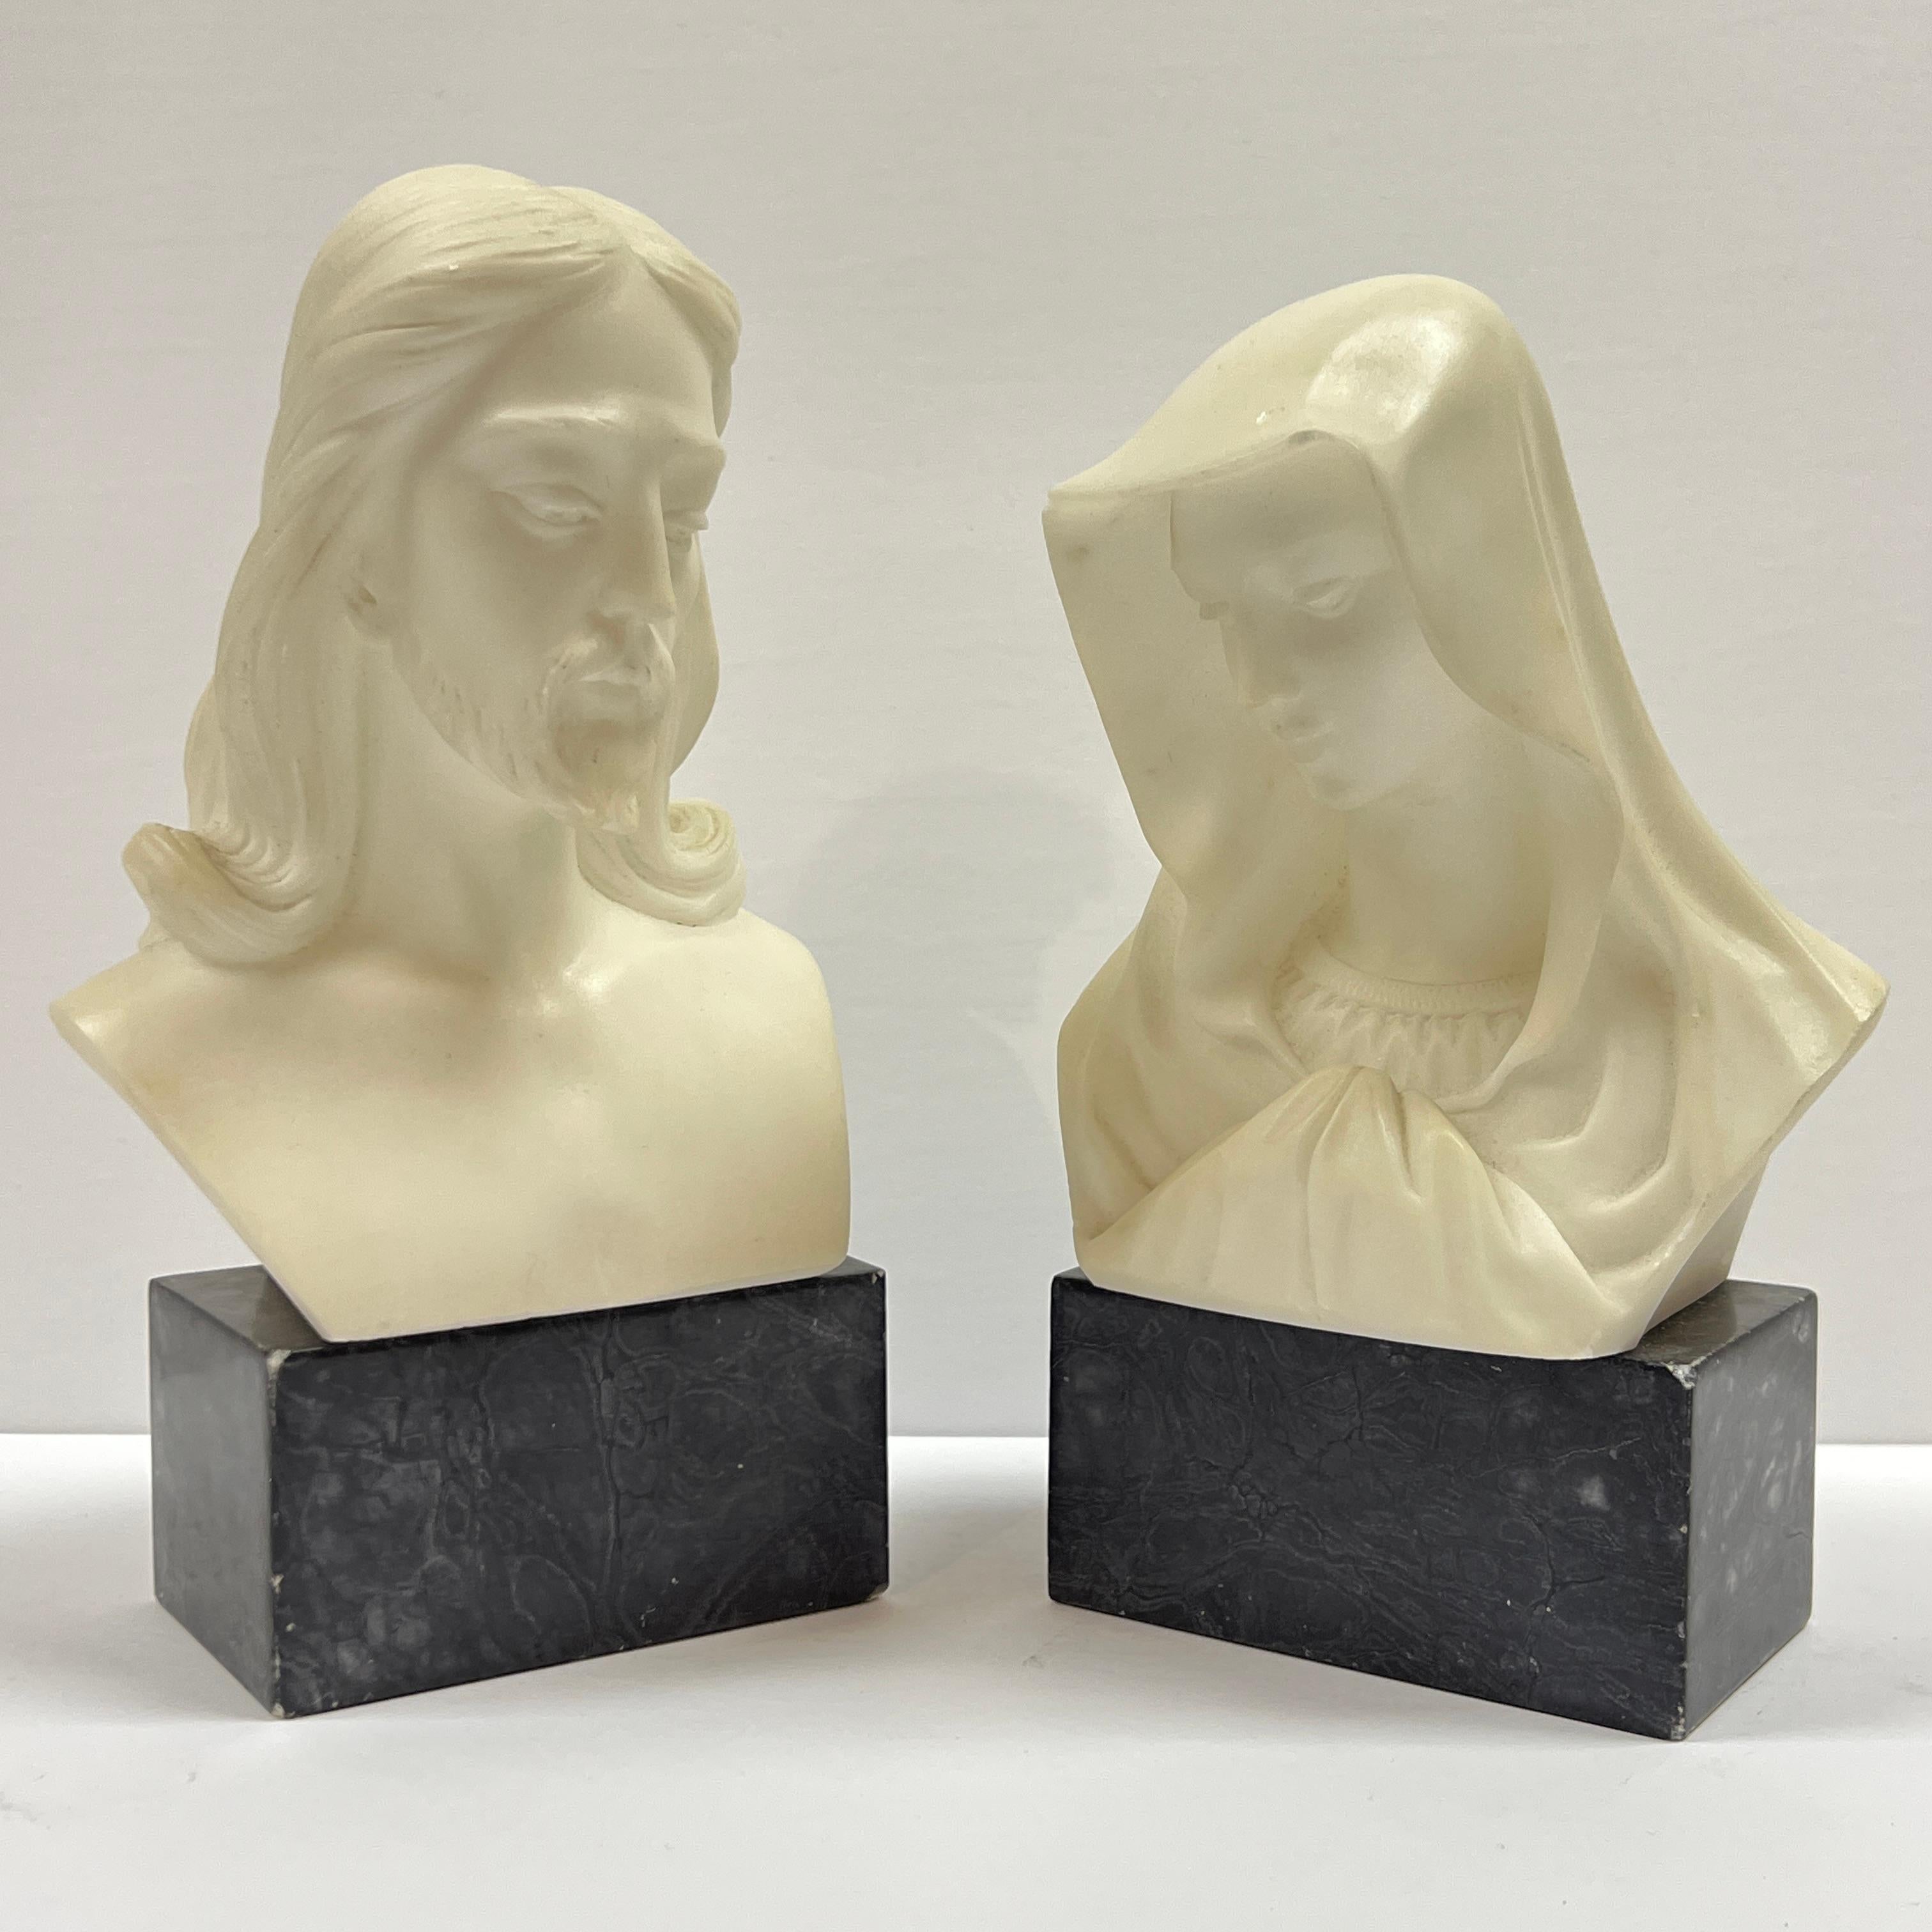 Our pair of marble busts depicting Jesus and Mary were sculpted by the Italian master, Giuseppe Bessi, (1857-1922). Each signed Prof G. Bessi.

Bessi was born in Volterra and studied at the Academy of fine Arts in Florence. He returned to his